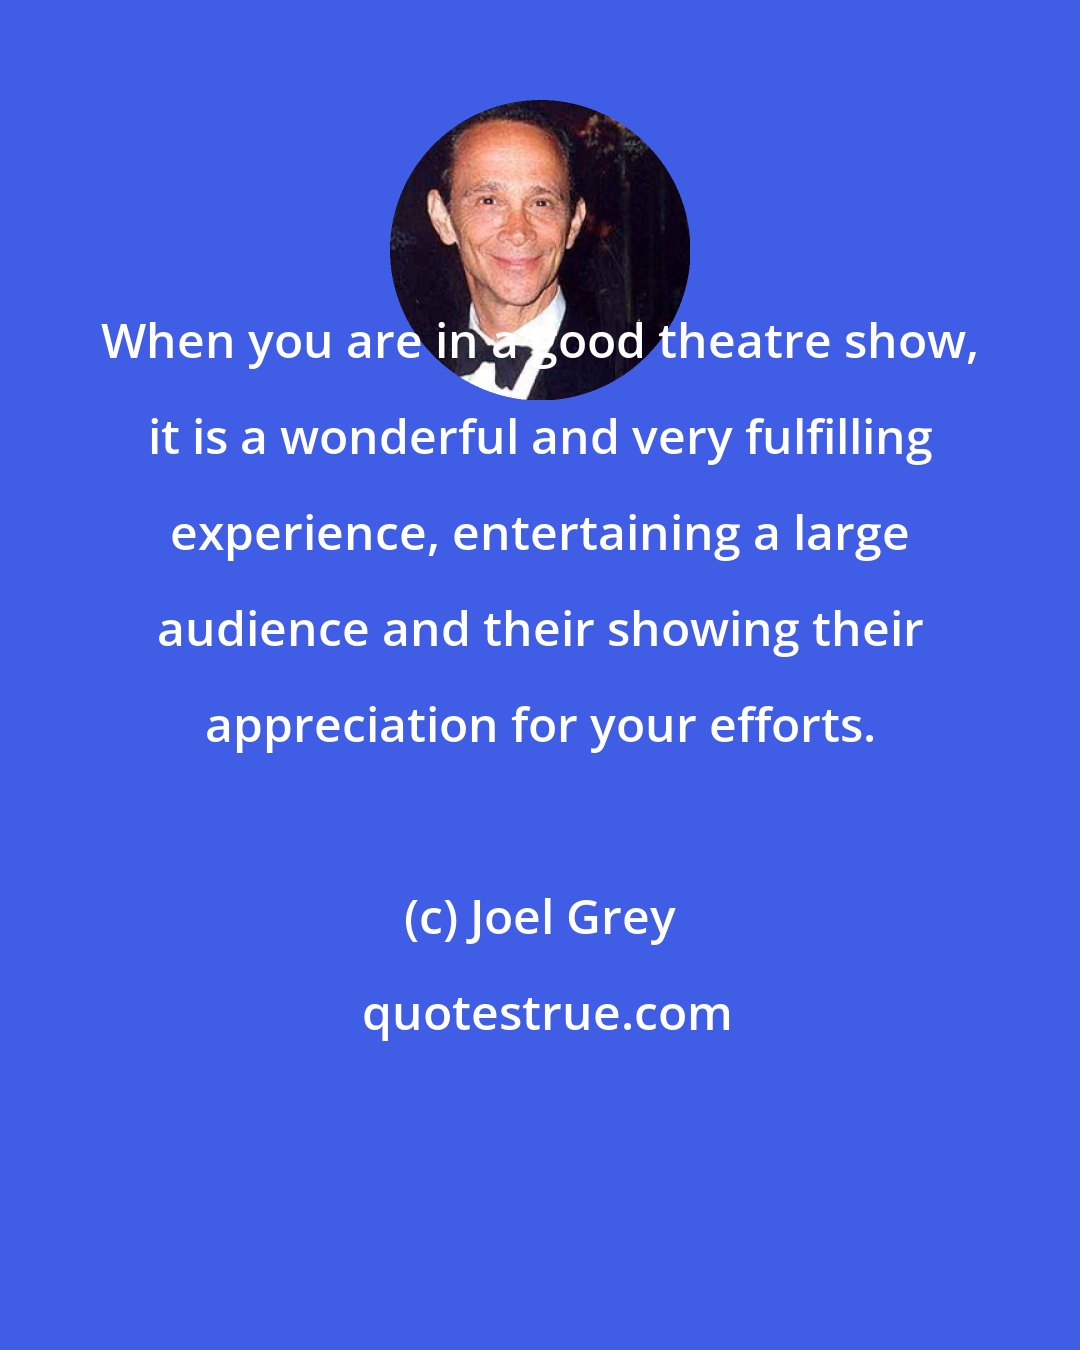 Joel Grey: When you are in a good theatre show, it is a wonderful and very fulfilling experience, entertaining a large audience and their showing their appreciation for your efforts.